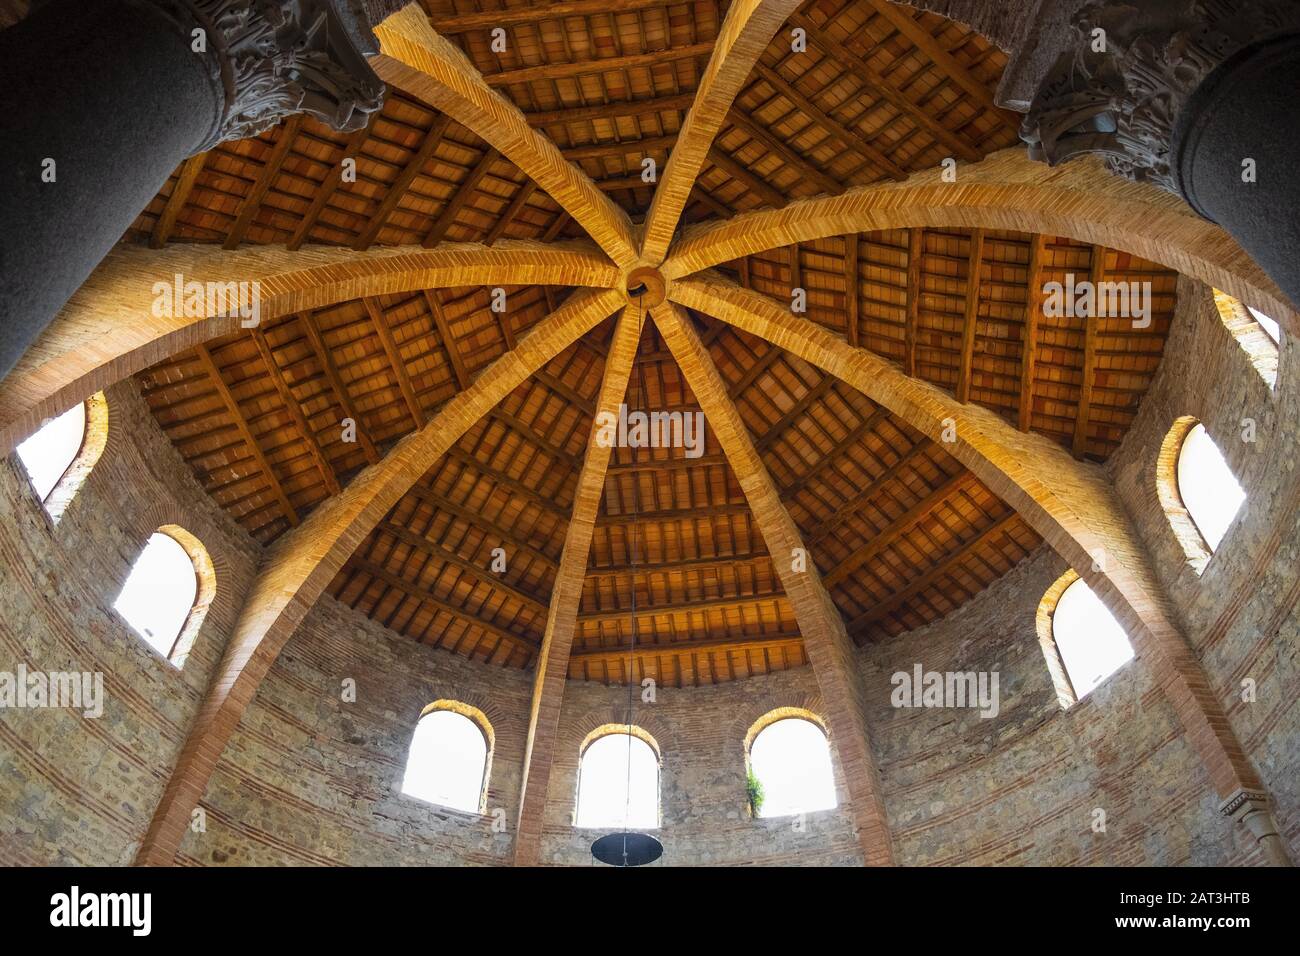 Perugia, Umbria / Italy - 2018/05/28: Interior of the V century Early Christianity St. Michel Archangel Church - Chiesa di San Michele Arcangelo in Perugia historic quarter Stock Photo